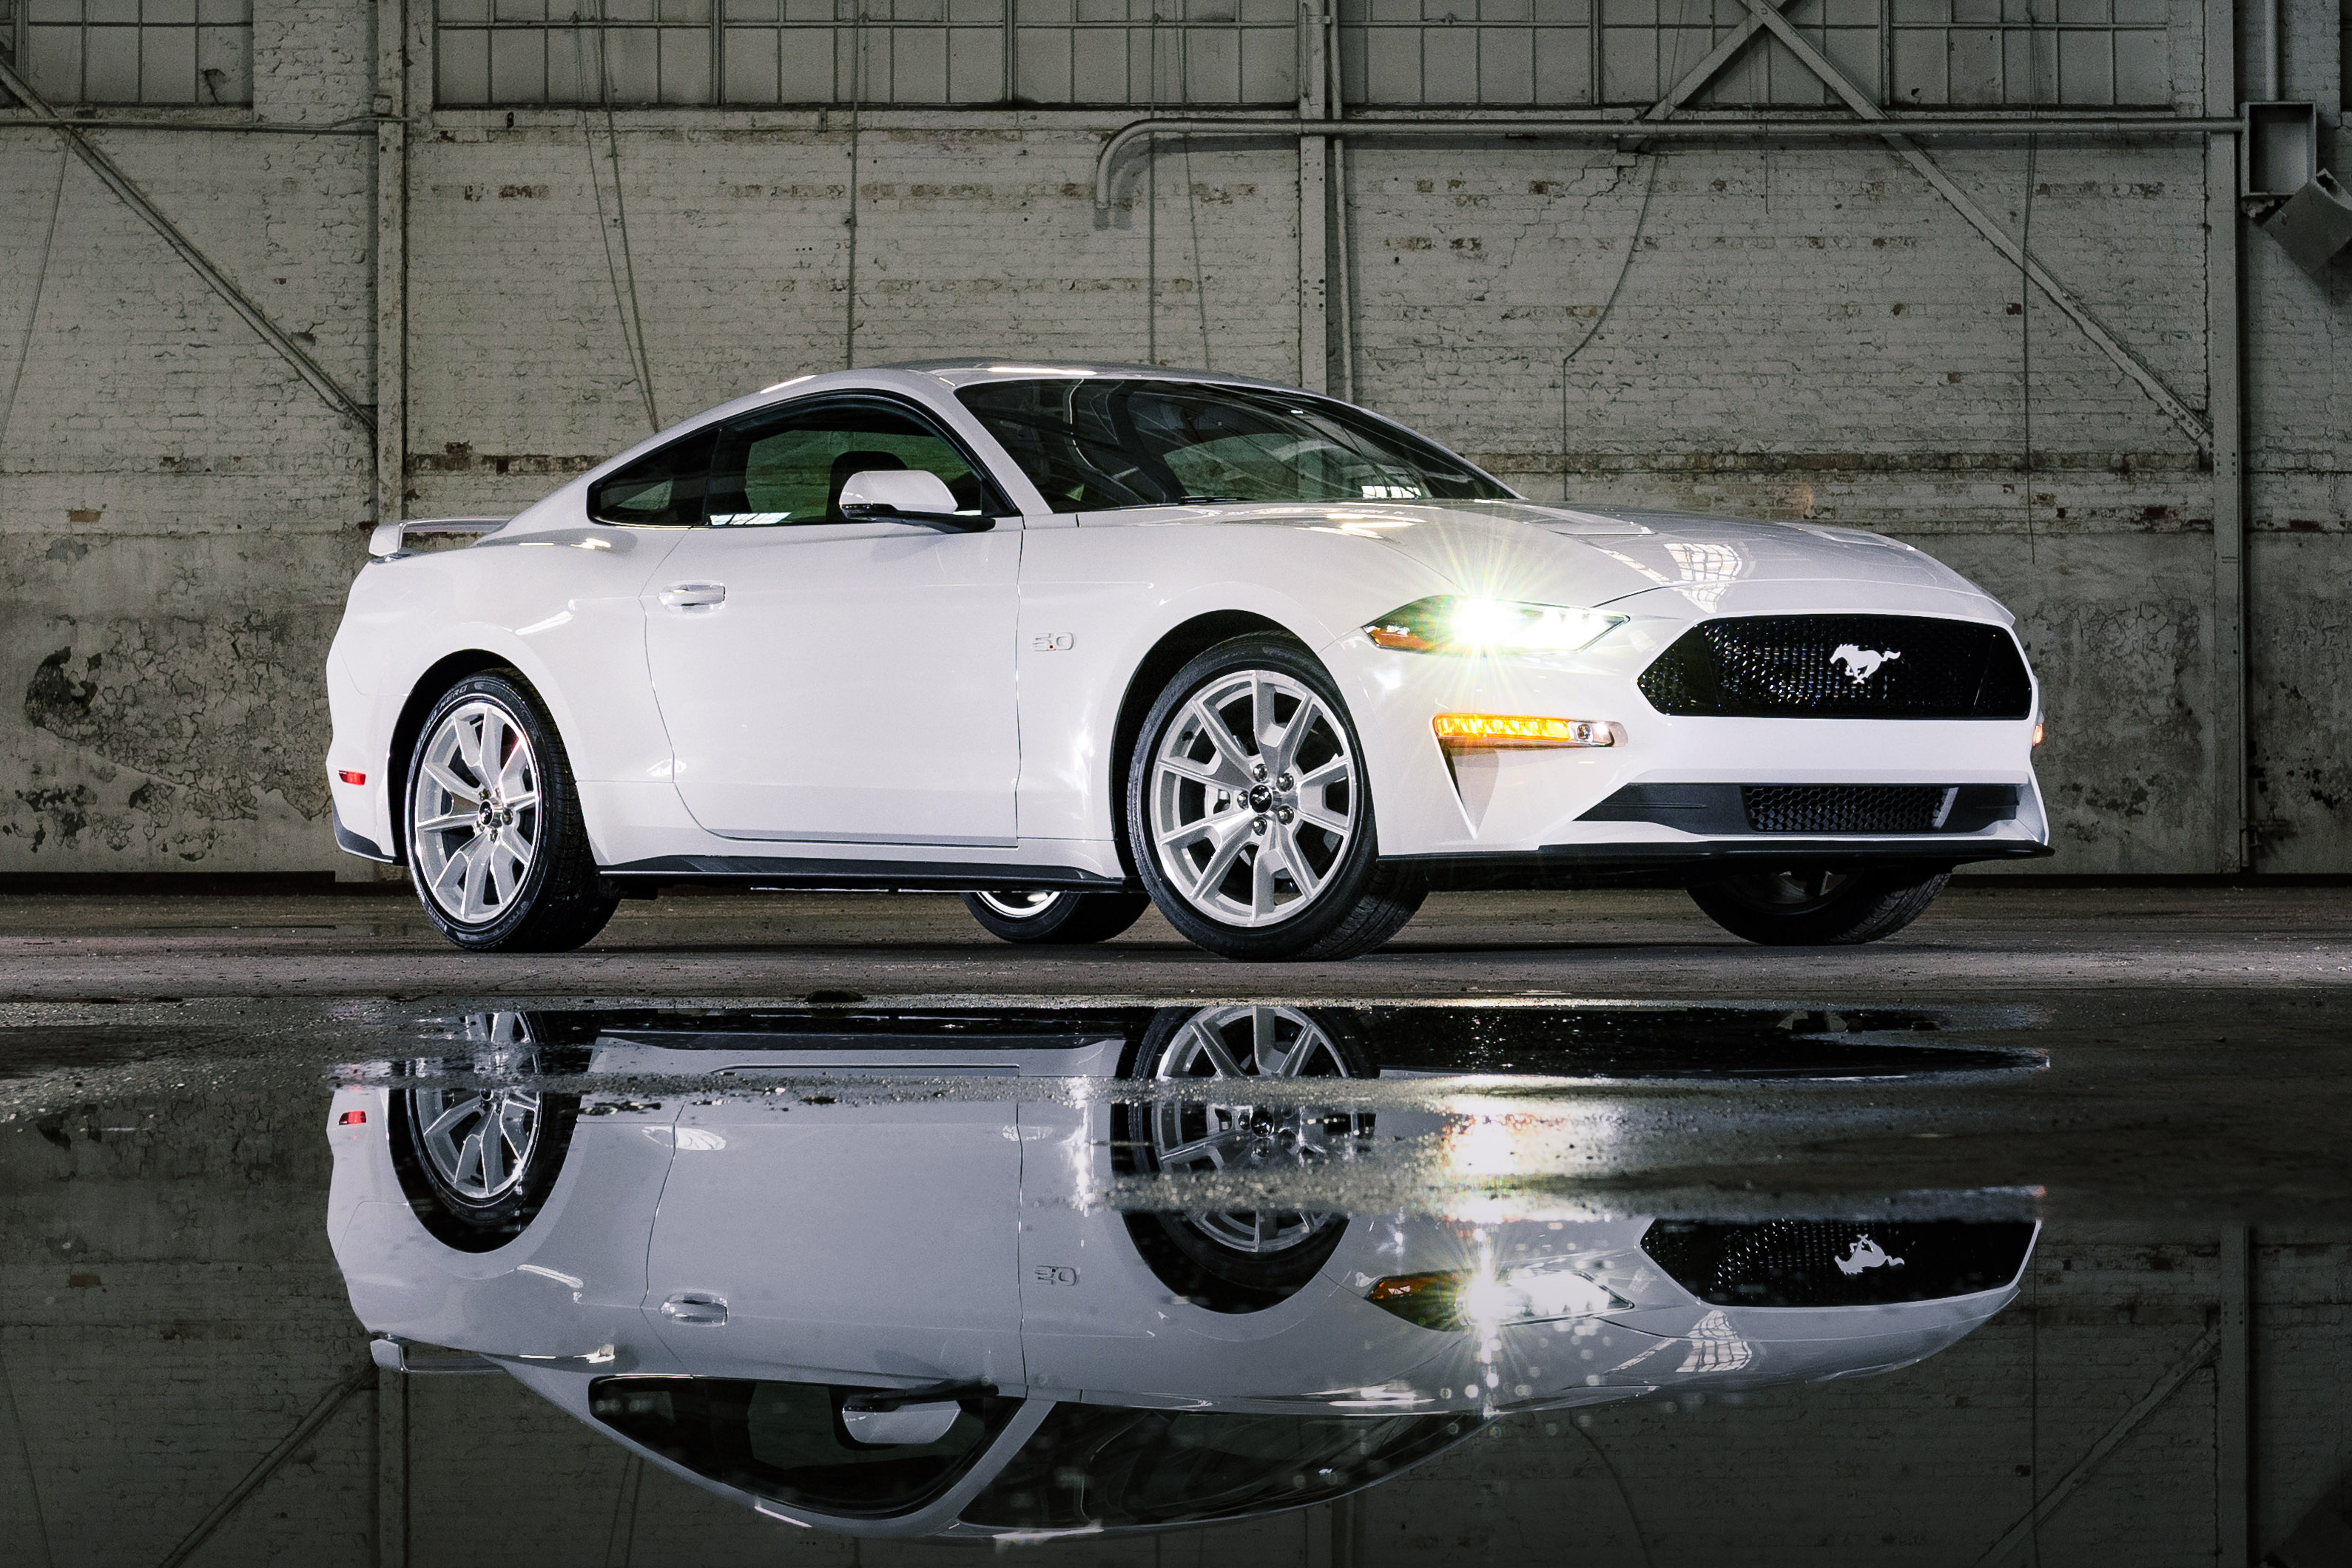 2022 Ford Mustang & Mach-E | Ice White Edition - 2022 Ford Mustang & Mach-E | Ice White Edition